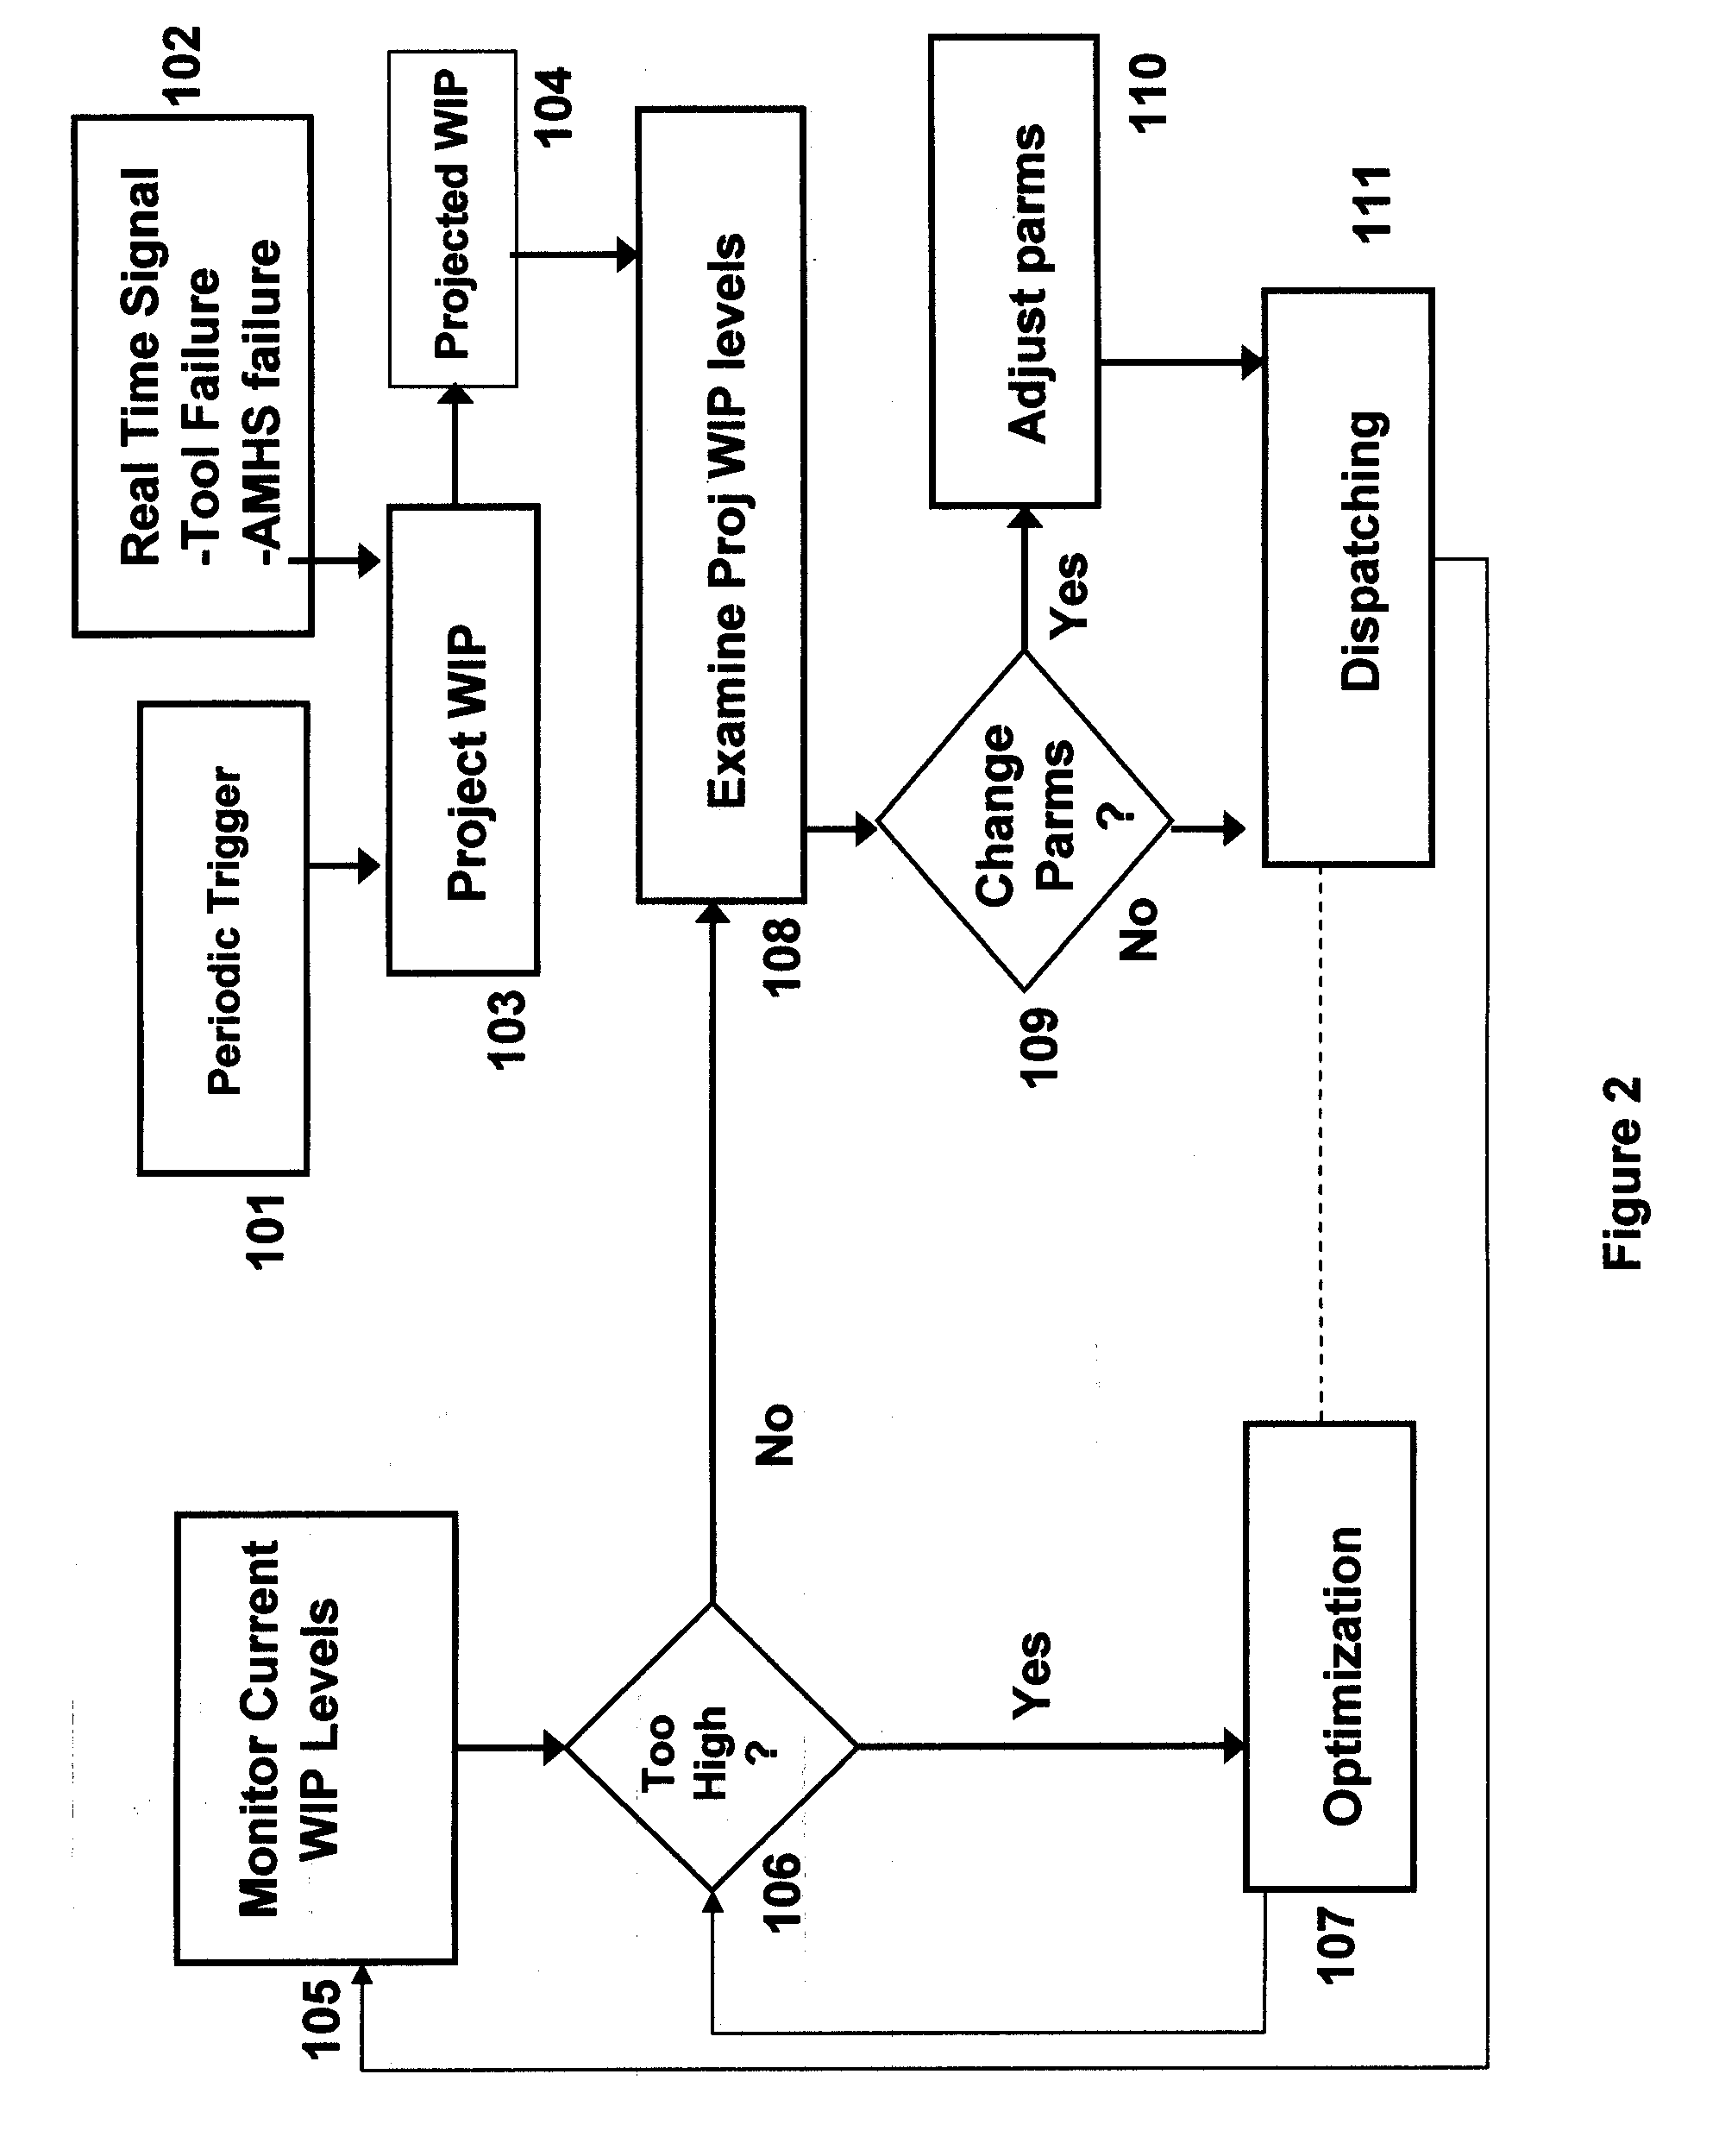 A method for autonomic control of a manufacturing system